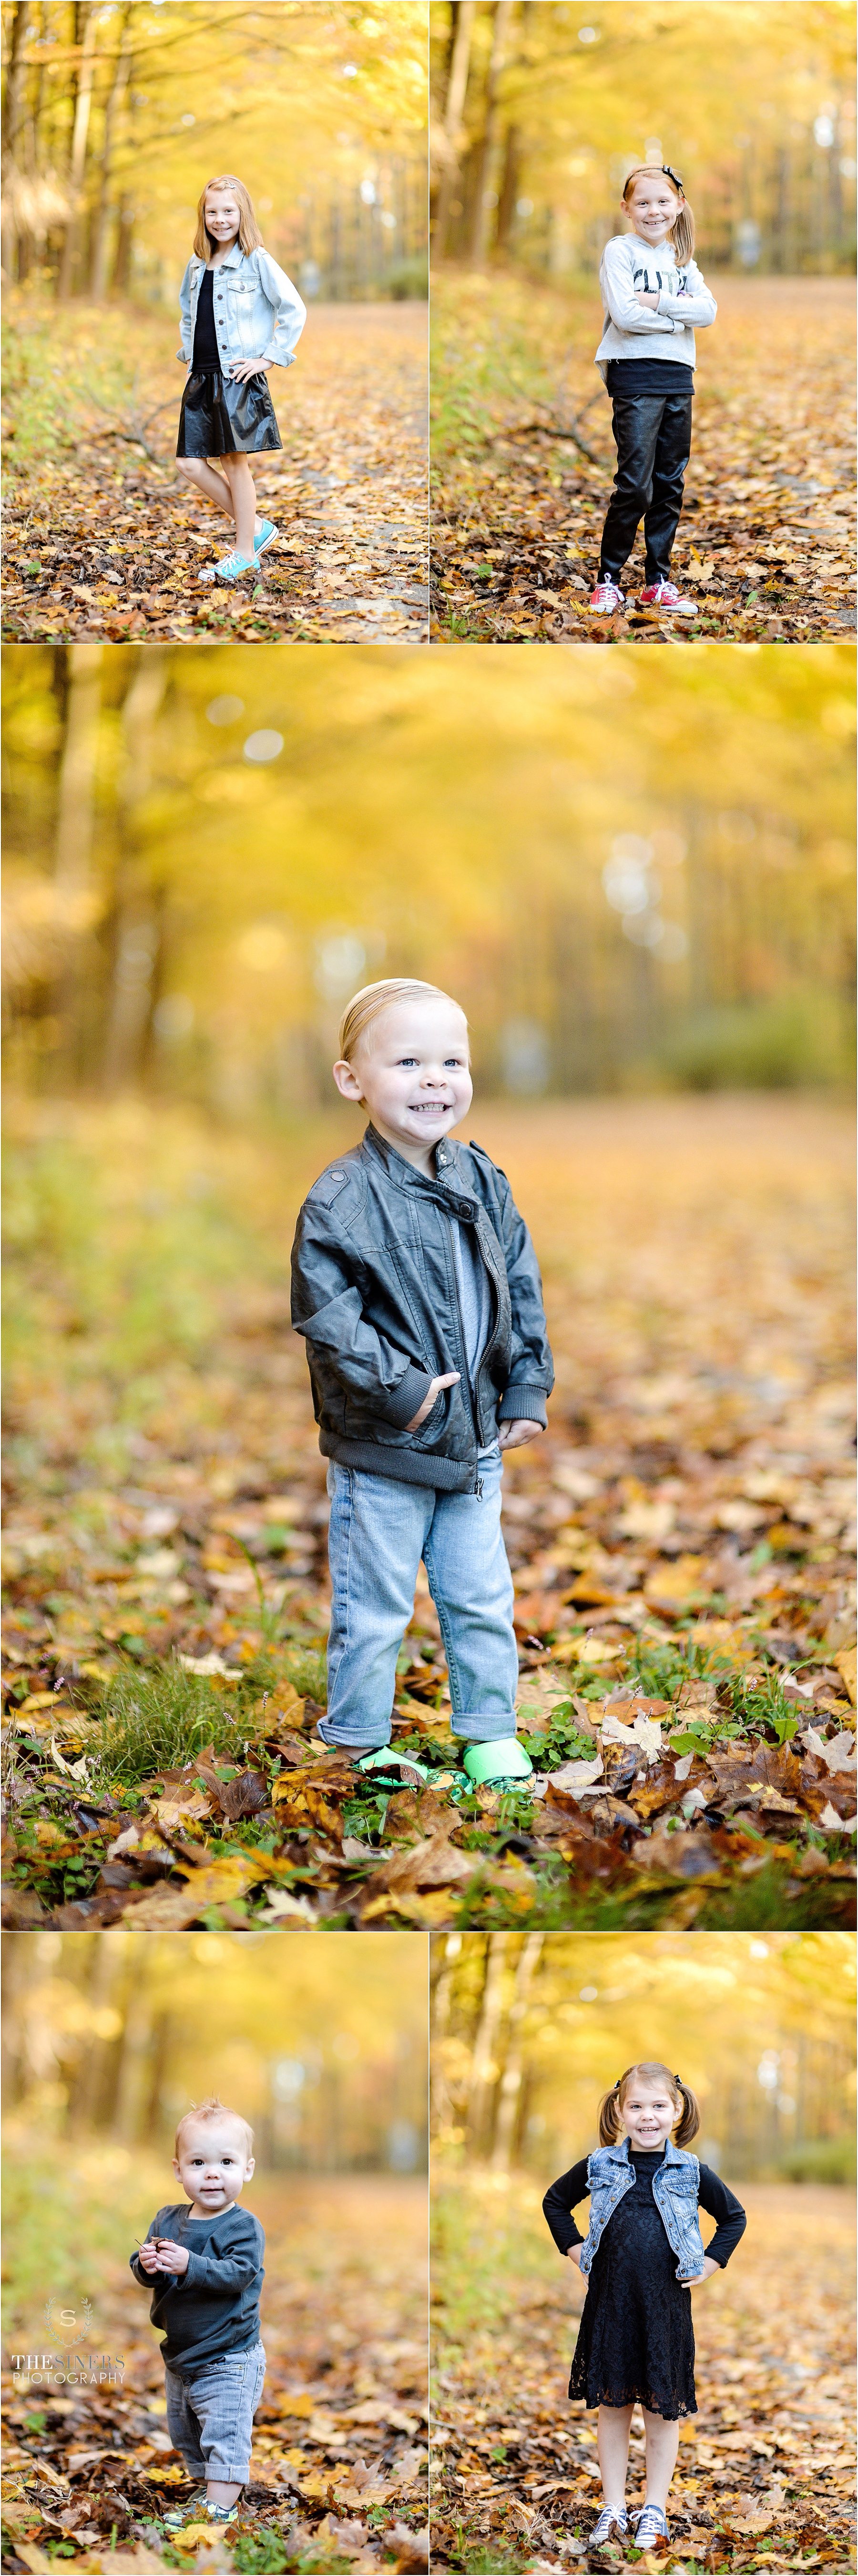 Sumrall Family_Indianapolis Family Photographer_TheSinersPhotography_0002